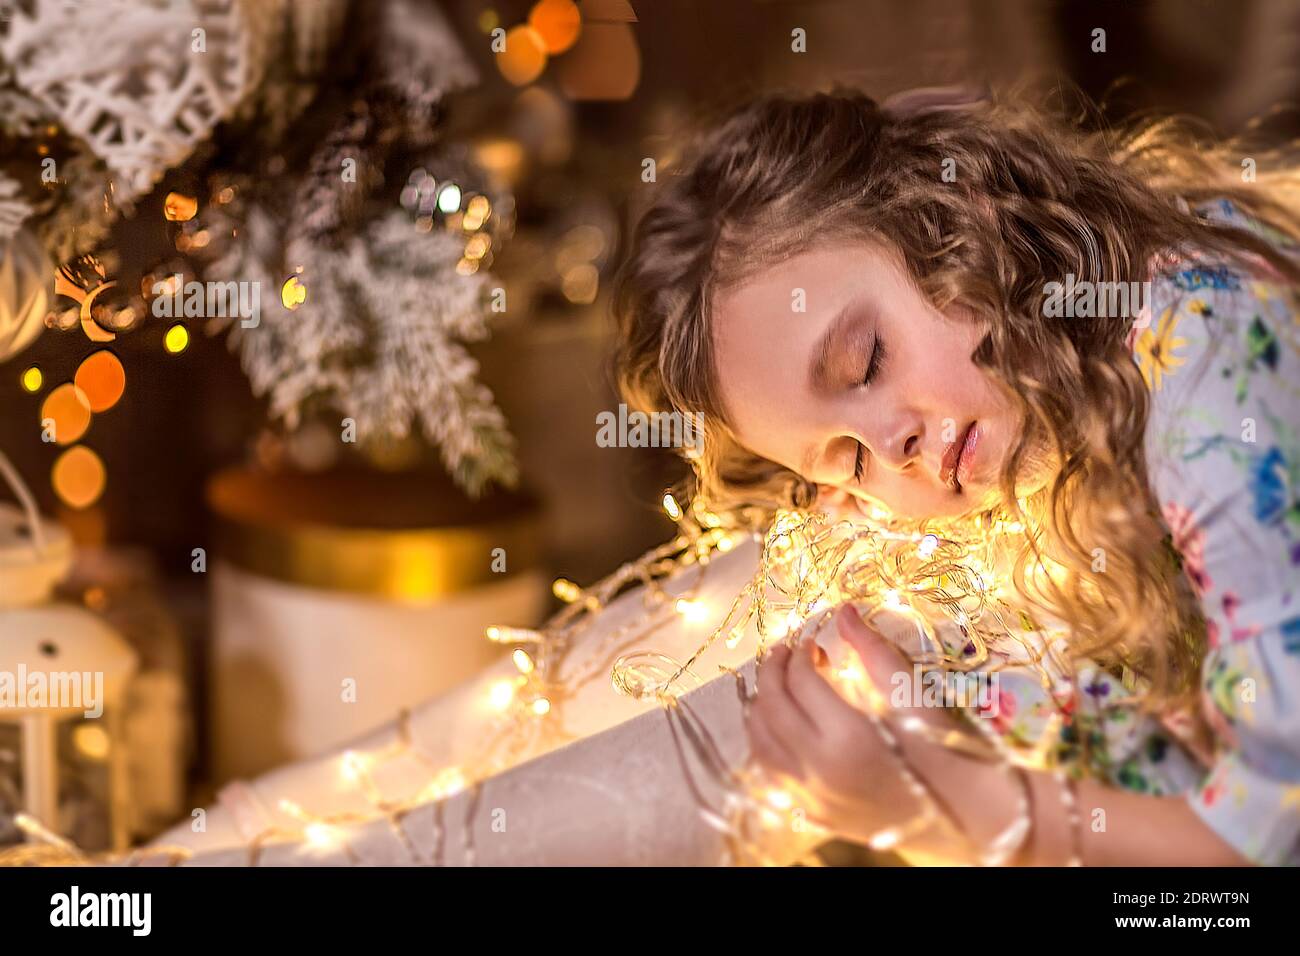 A beautiful girl with curly long hair is sitting near a Christmas tree. Holding a garland of Christmas lights. The concept of winter recreation at hom Stock Photo